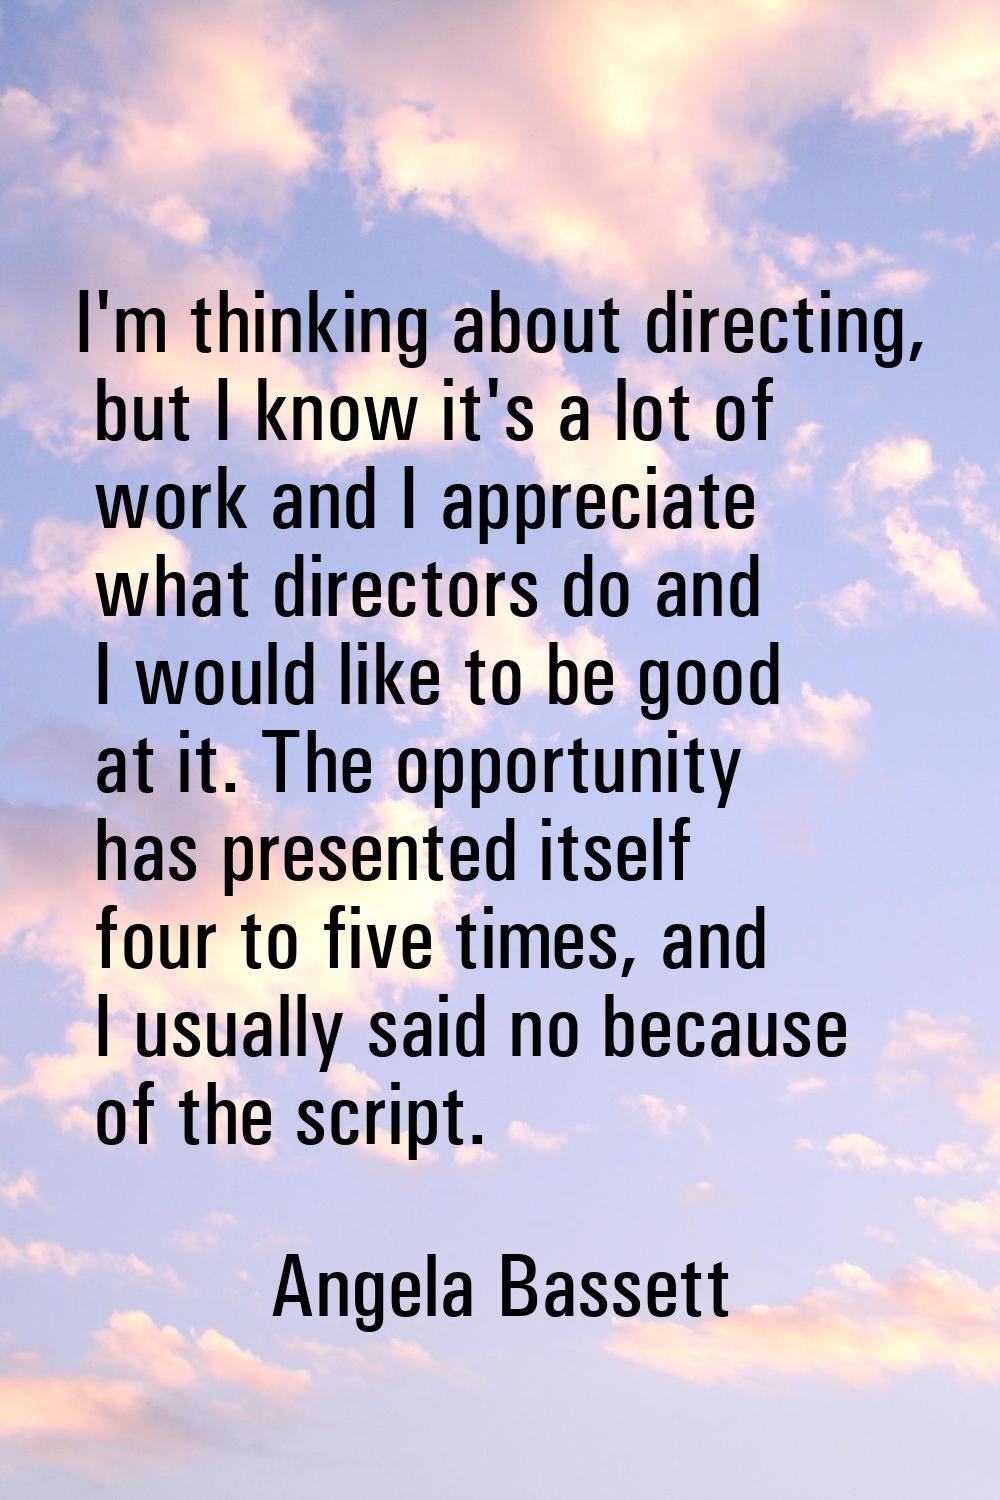 I'm thinking about directing, but I know it's a lot of work and I appreciate what directors do and 